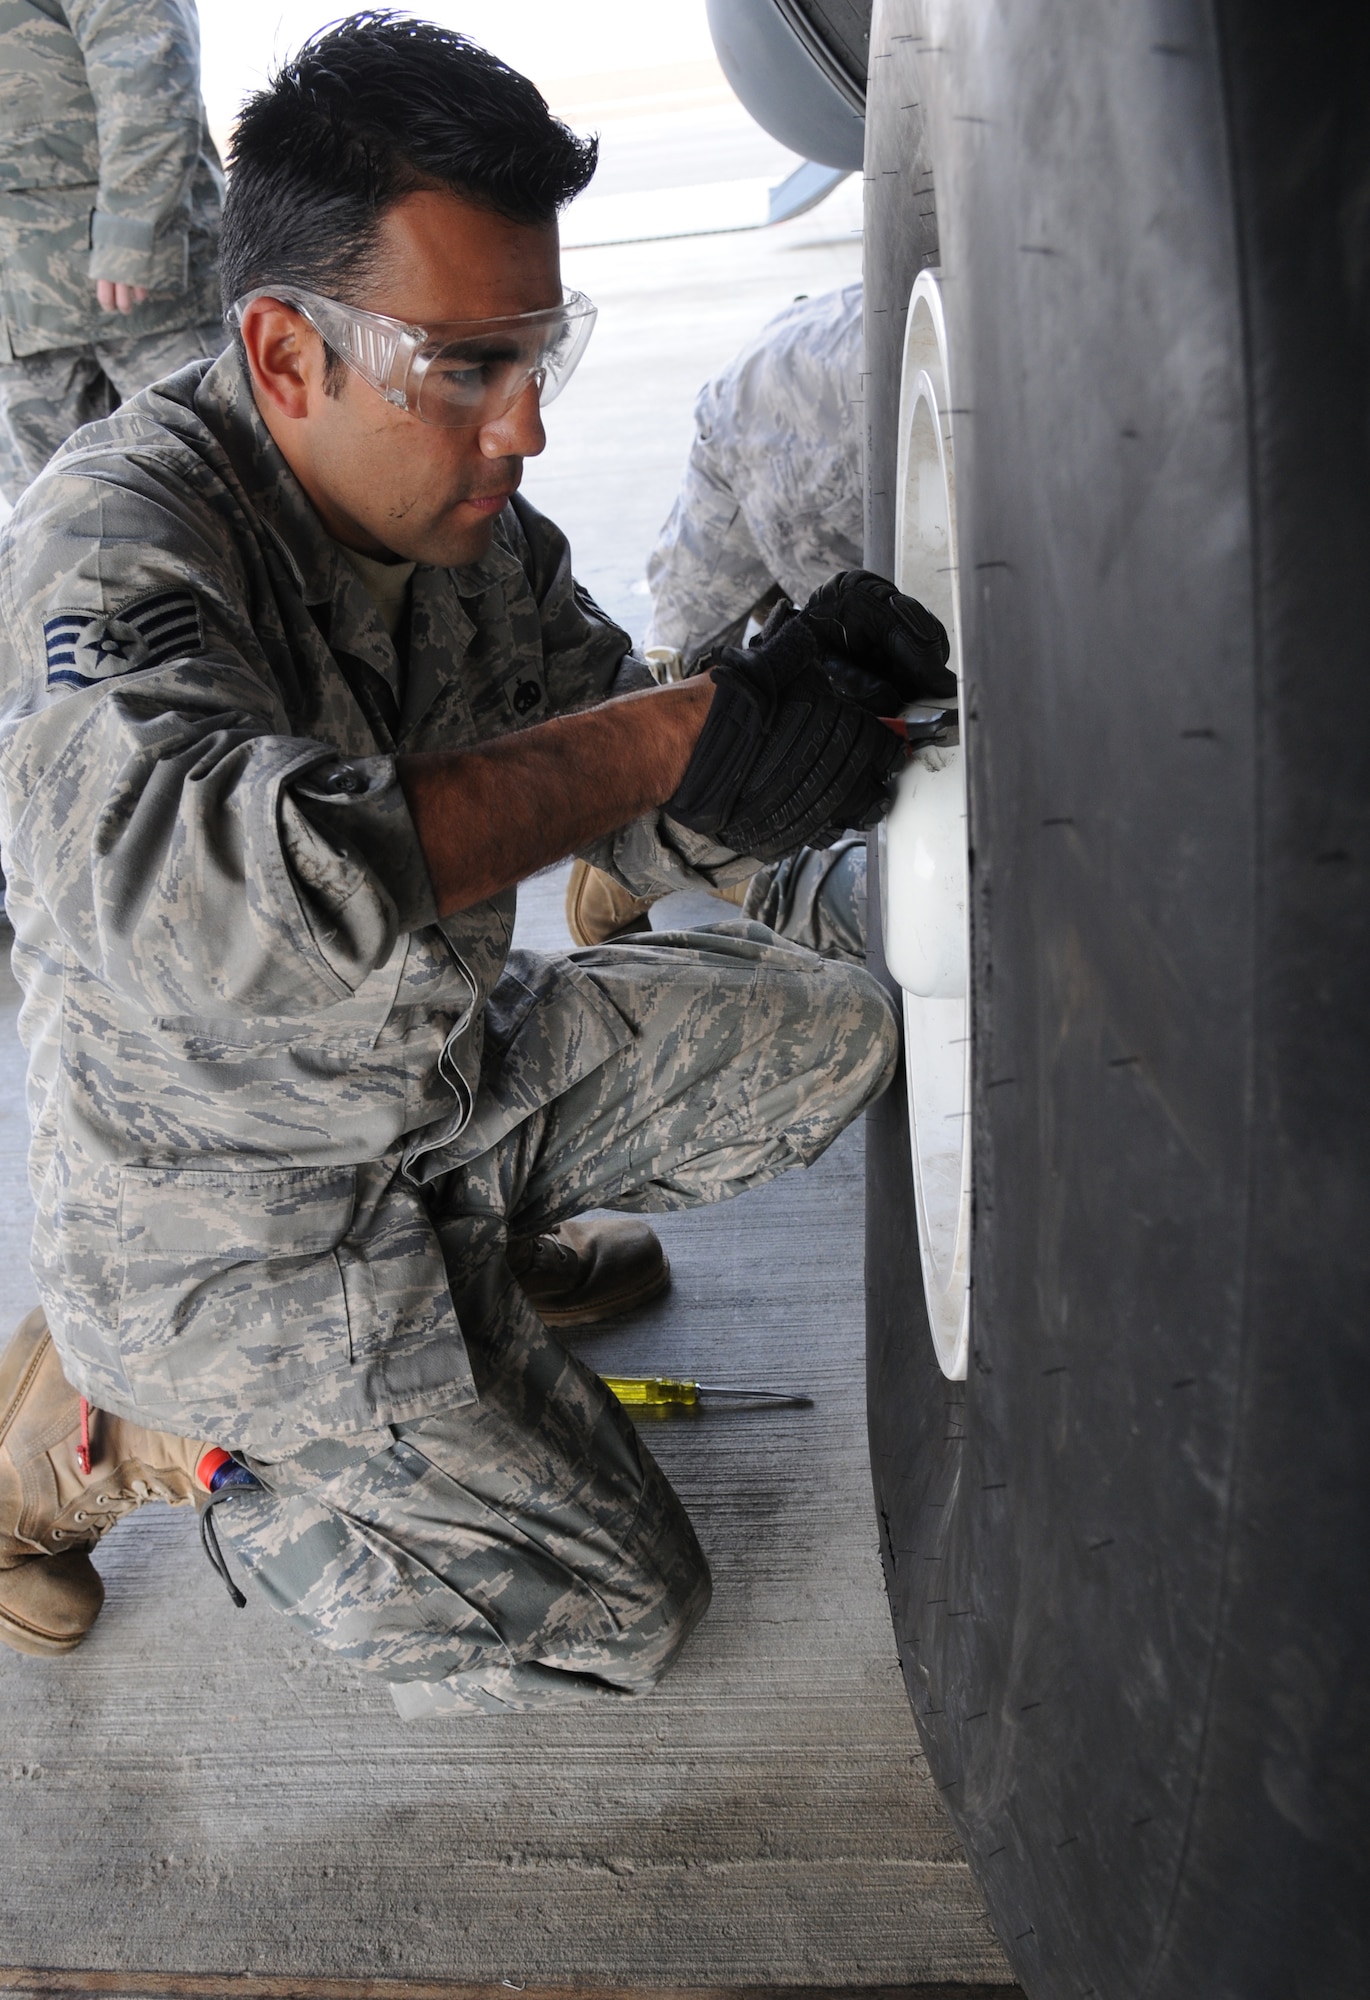 U.S. Air Force Staff Sgt. Richard Mora, 86th Maintenance Squadron aircraft hydraulics systems craftsman, gets ready to take off the tire of a C-130J Super Hercules, Nevatim Air Force, Israel, Dec. 9, 2009. Ramstein units participated in a 10-day training exercise to accomplish training requirements because of the strict air restrictions in Germany. (U.S. Air Force photo by Airman 1st Class Alexandria Mosness)